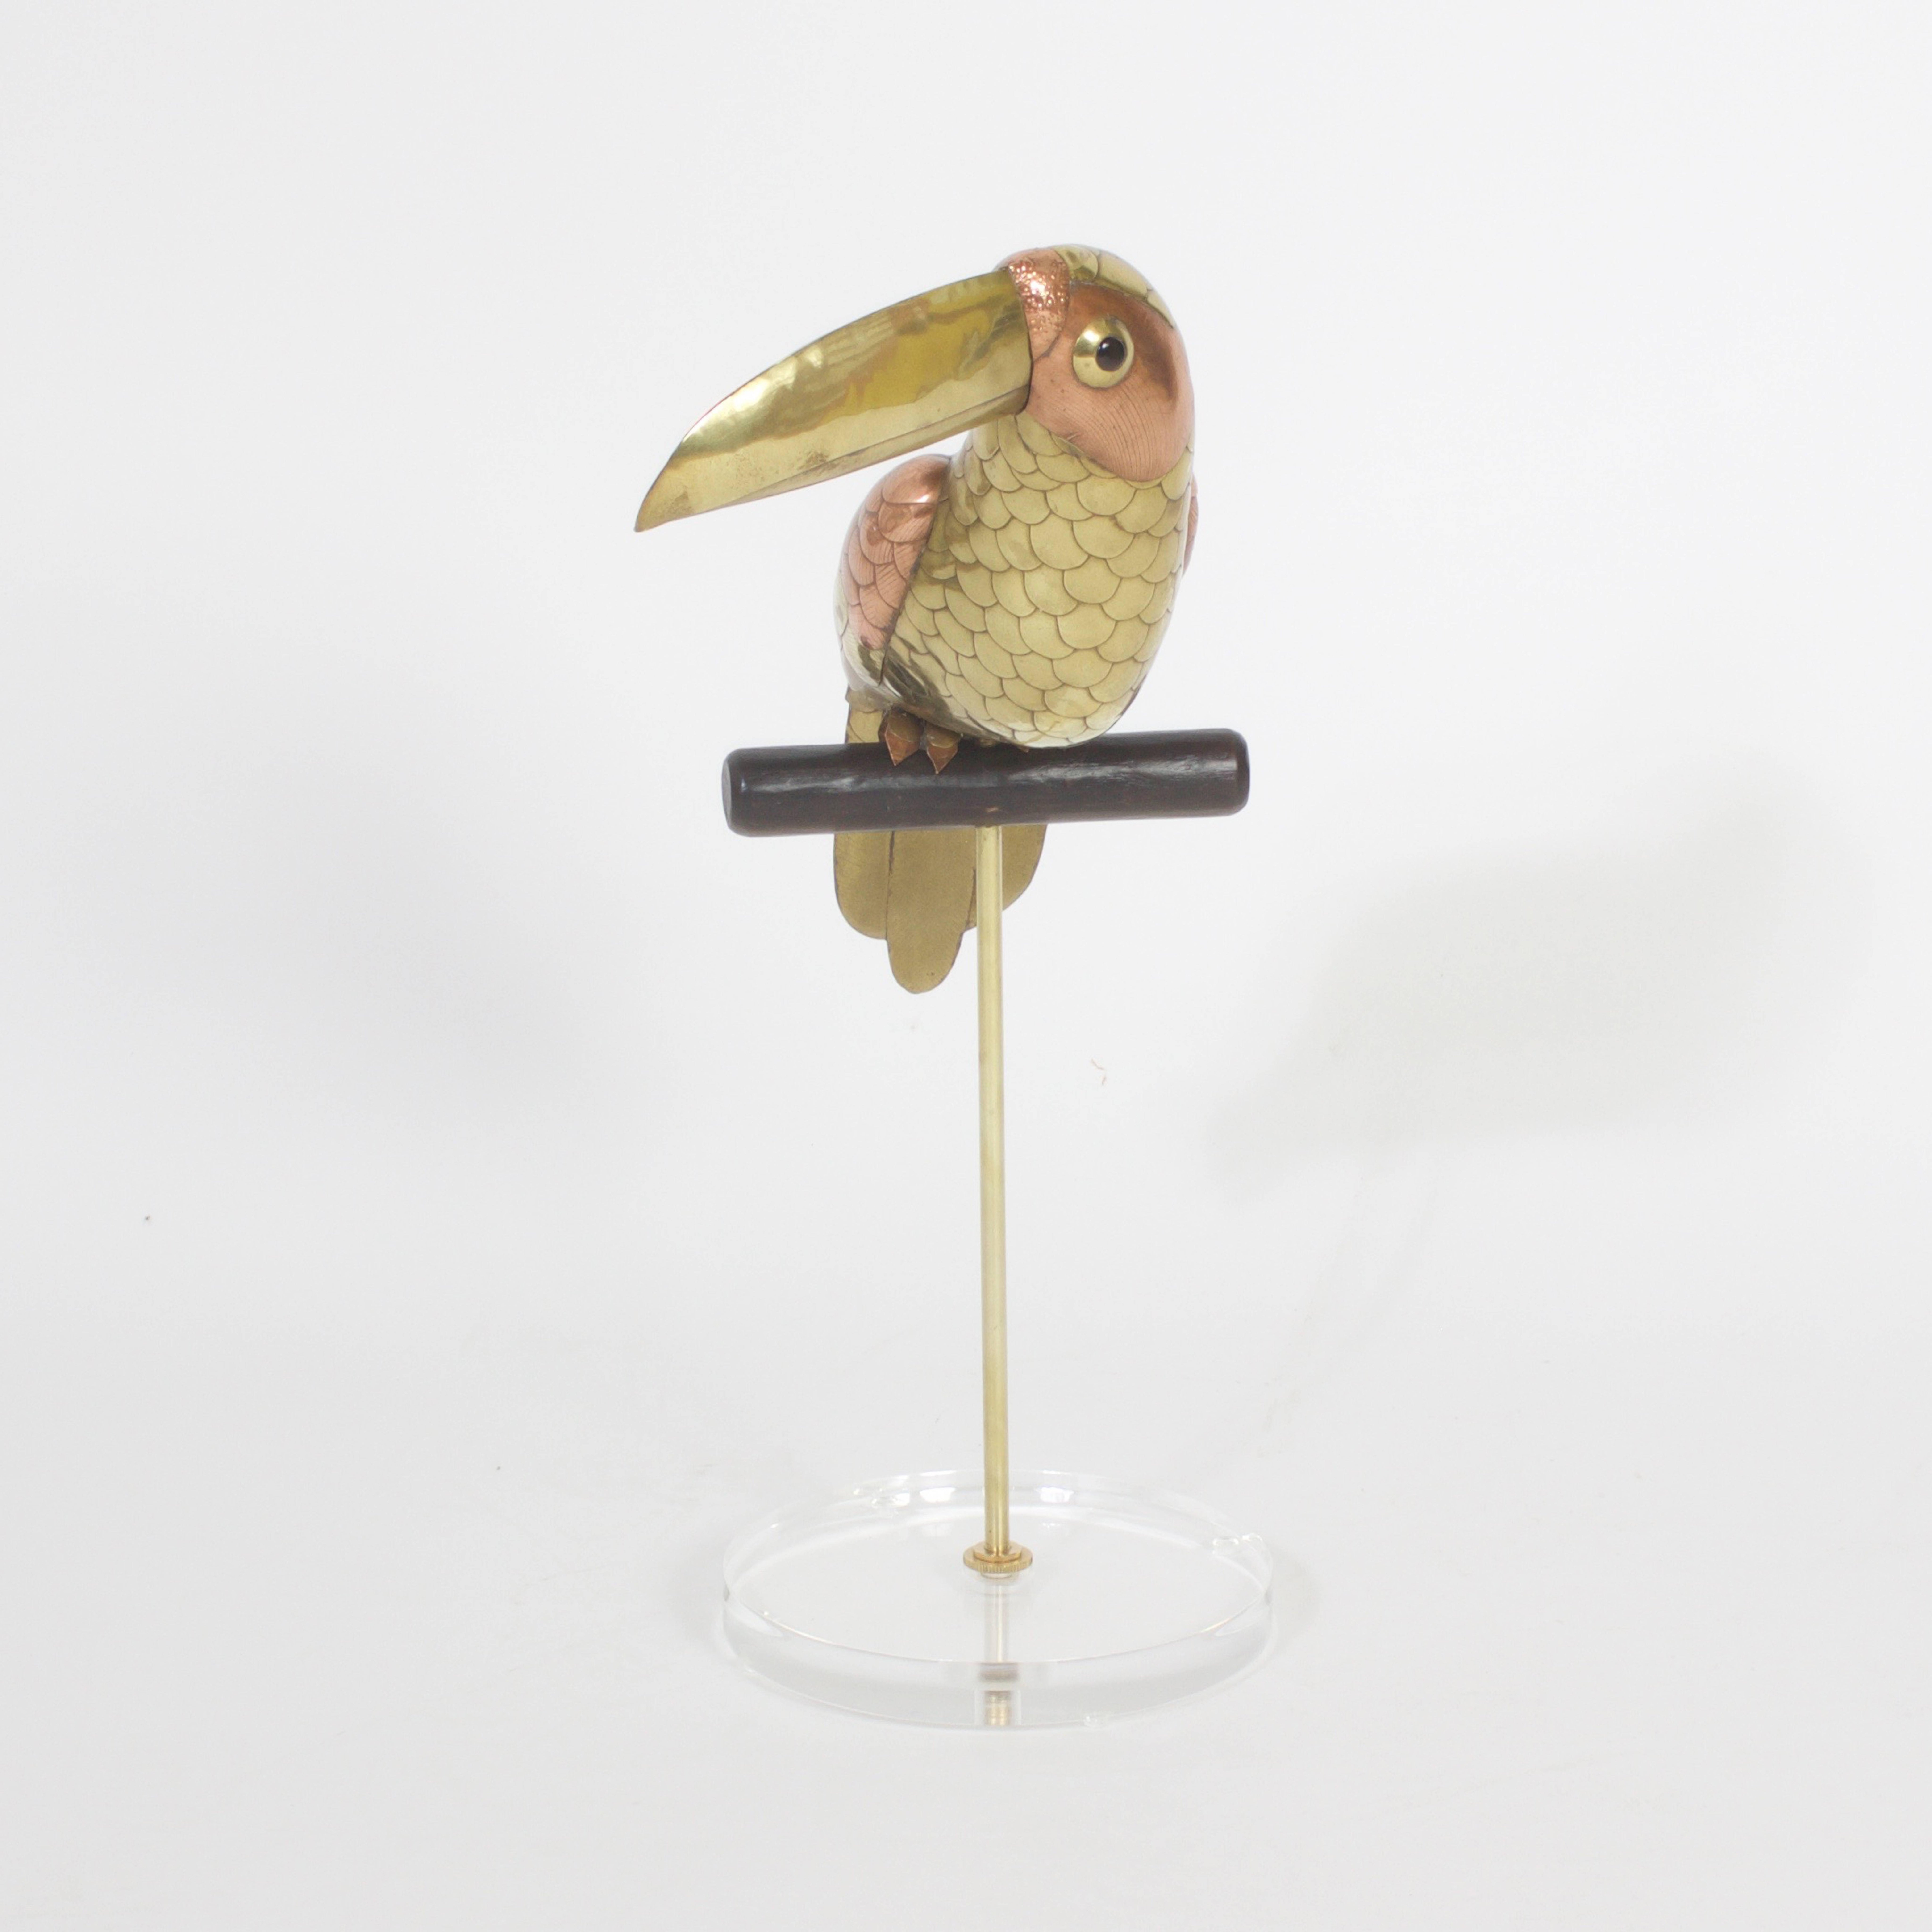 Mid century Bustamante brass and copper sculpture of a Toucan showing of his iconic beak with an amusing self assured expression. Mounted on a wood perch presented on a brass rod and lucite base.